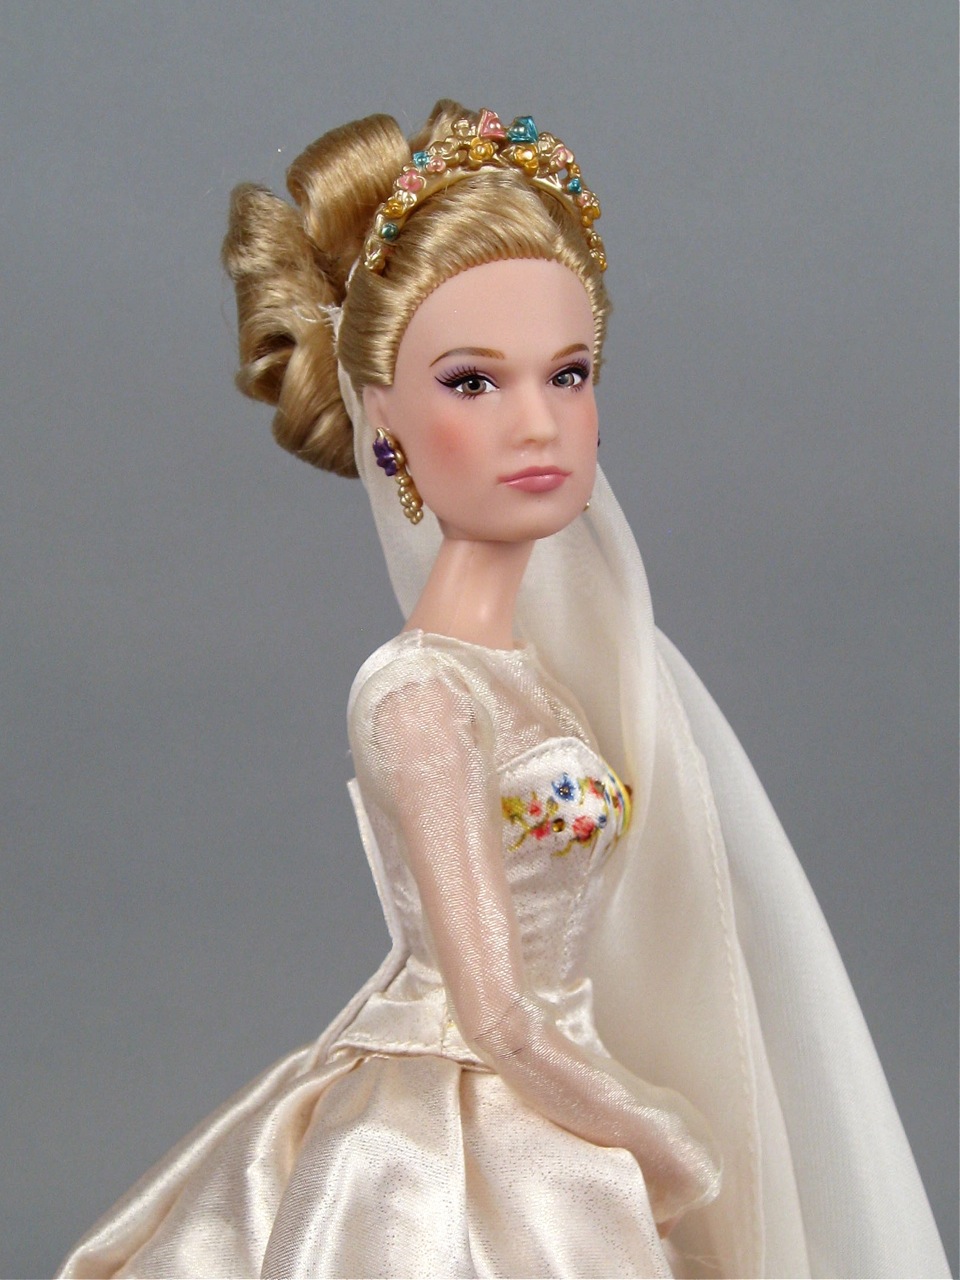 Cinderella and the Prince from the Disney Store and Mattel's Cinderella  Wedding Day